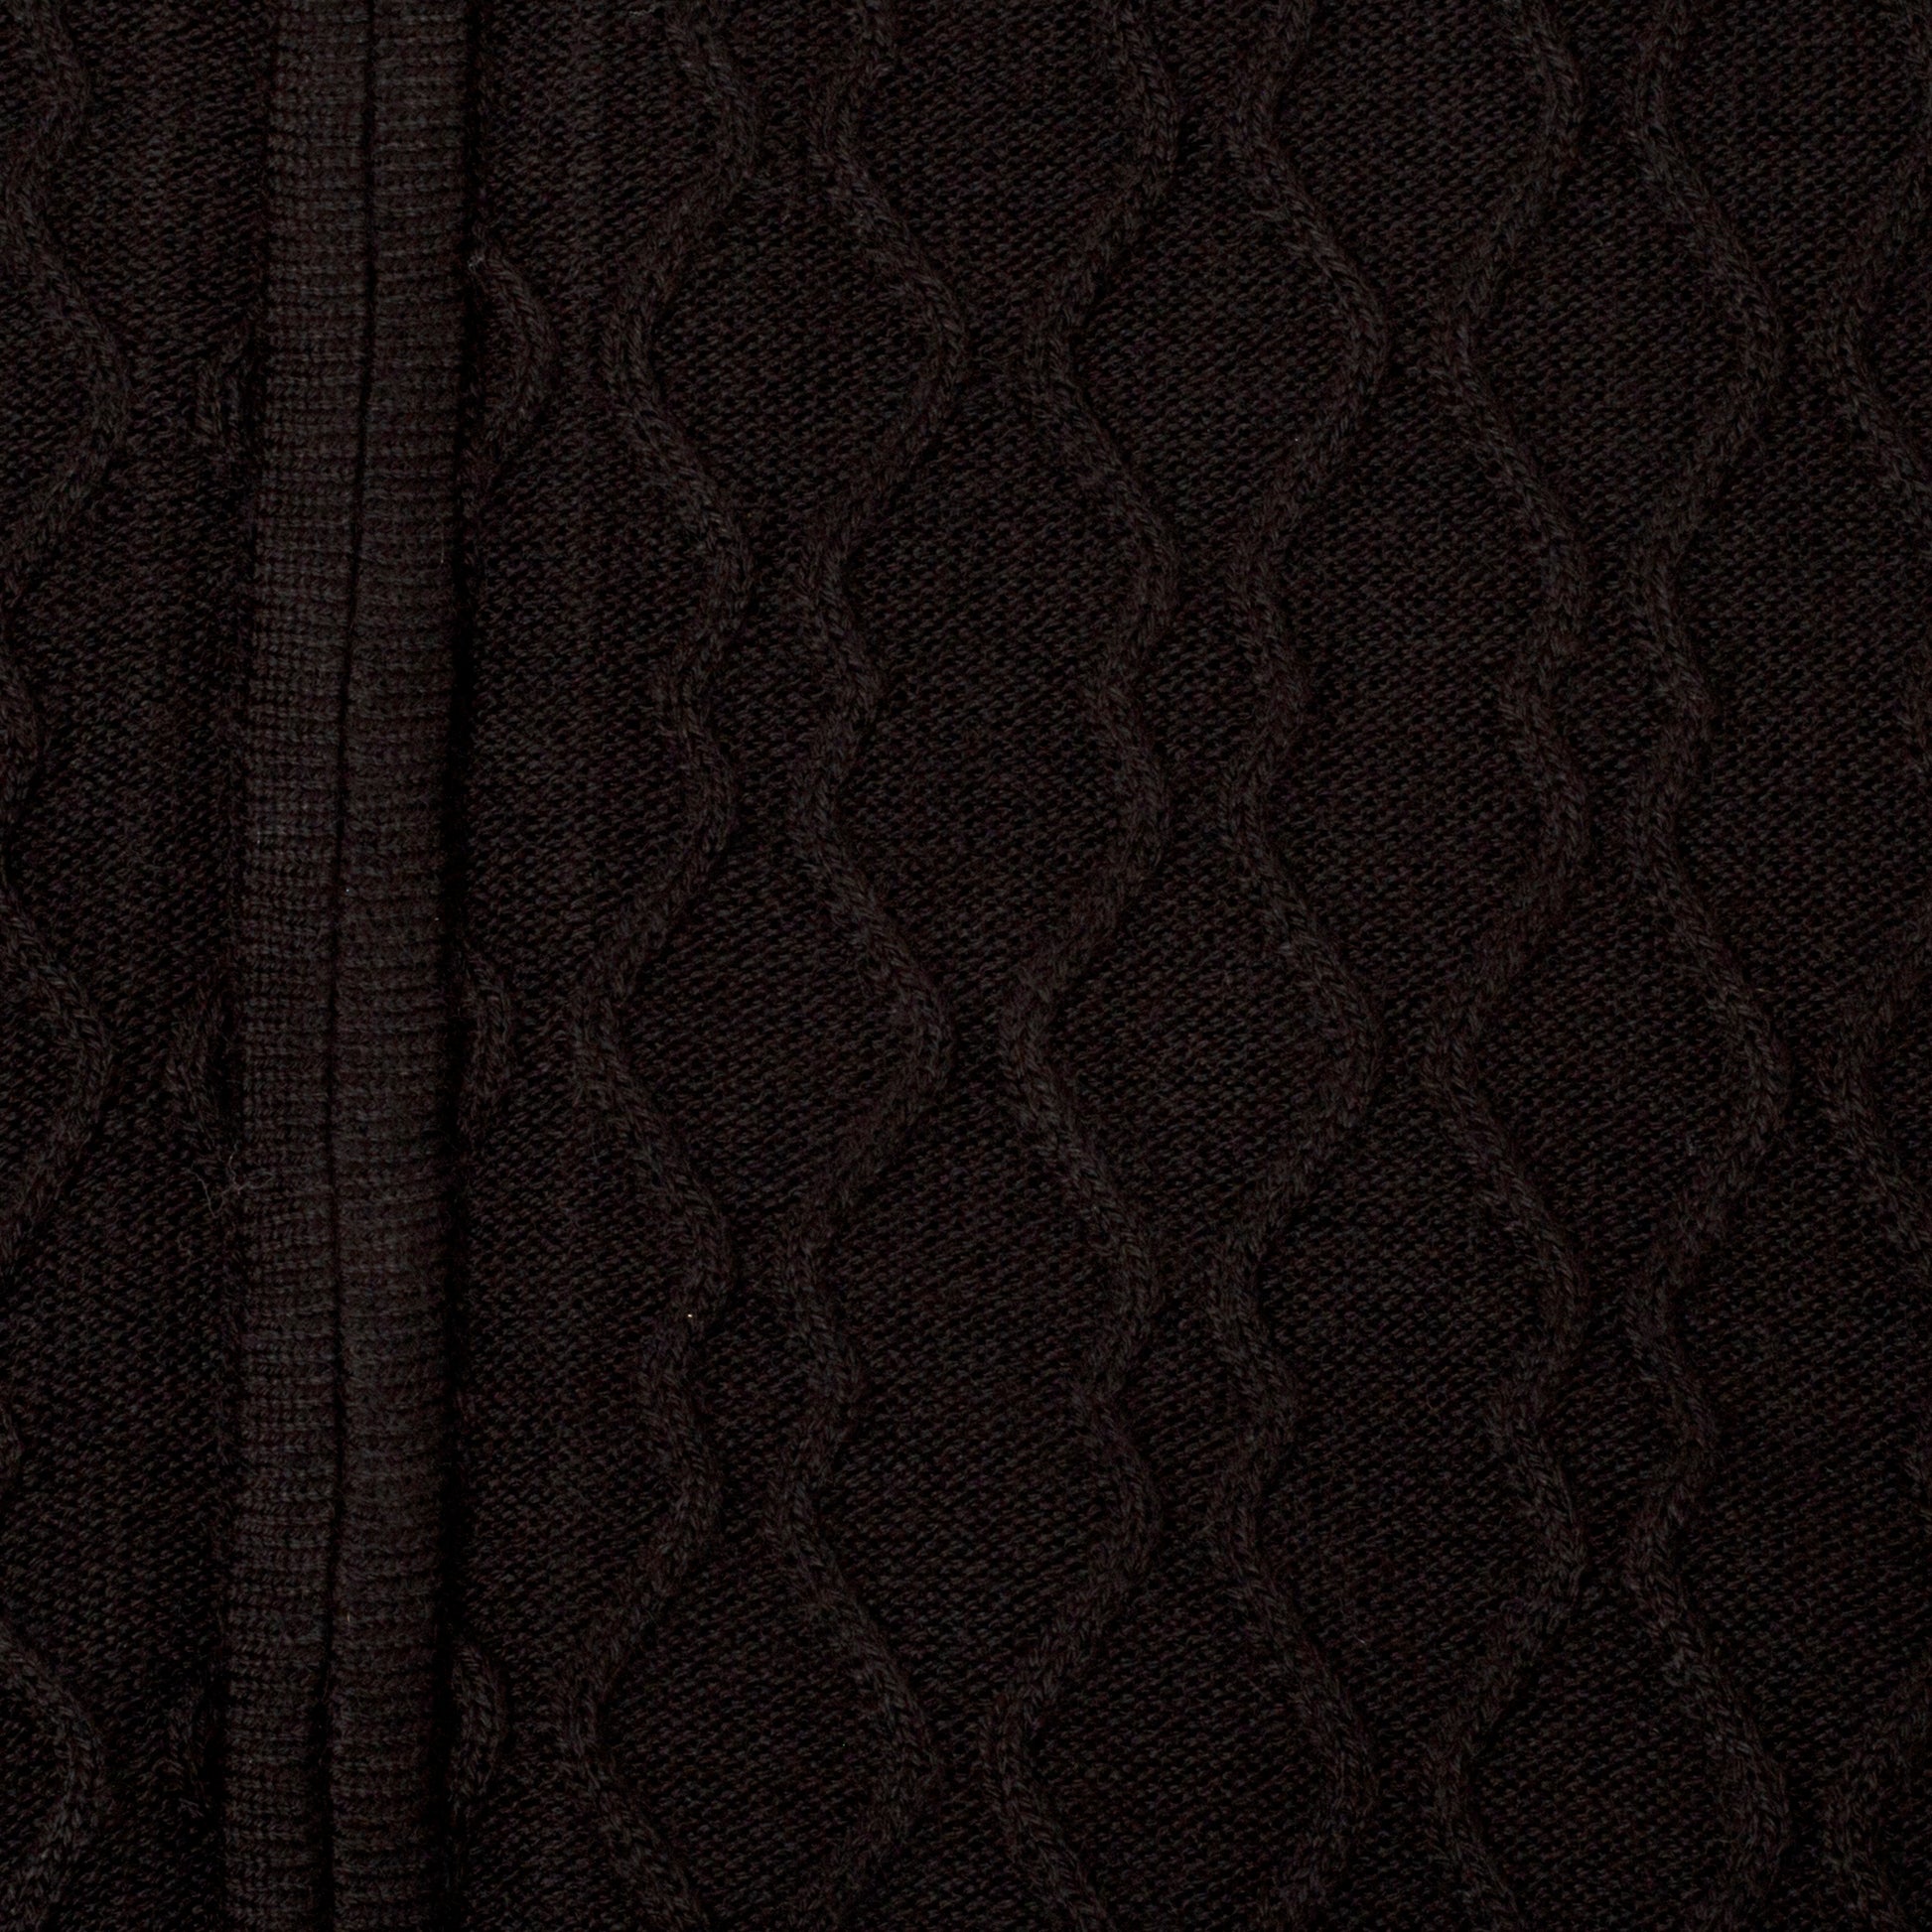 Green Lamb Ladies Lined Windstopper Cardigan with ZigZag Stitch Front Panel in Black